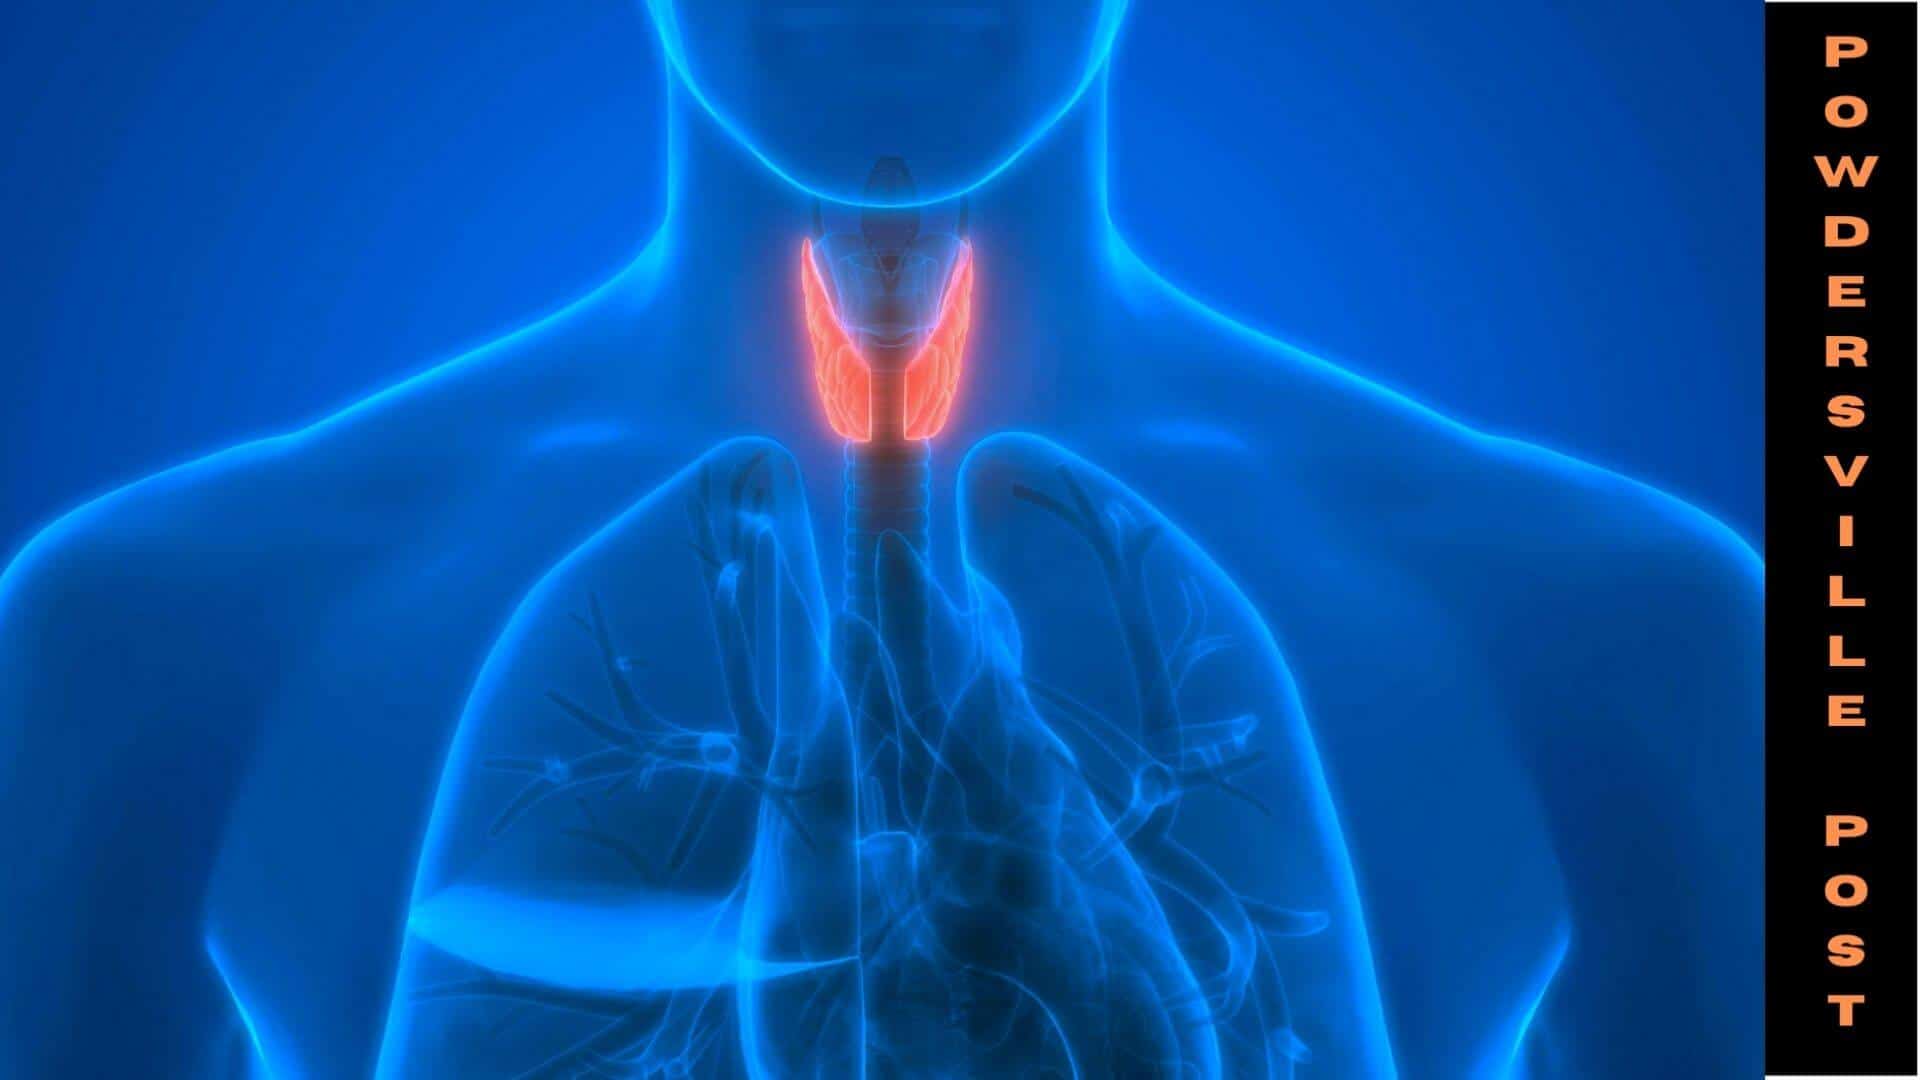 Thyroid-Glands-Can-Have-A-Significant-Impact-On-Cardiovascular-Health-1